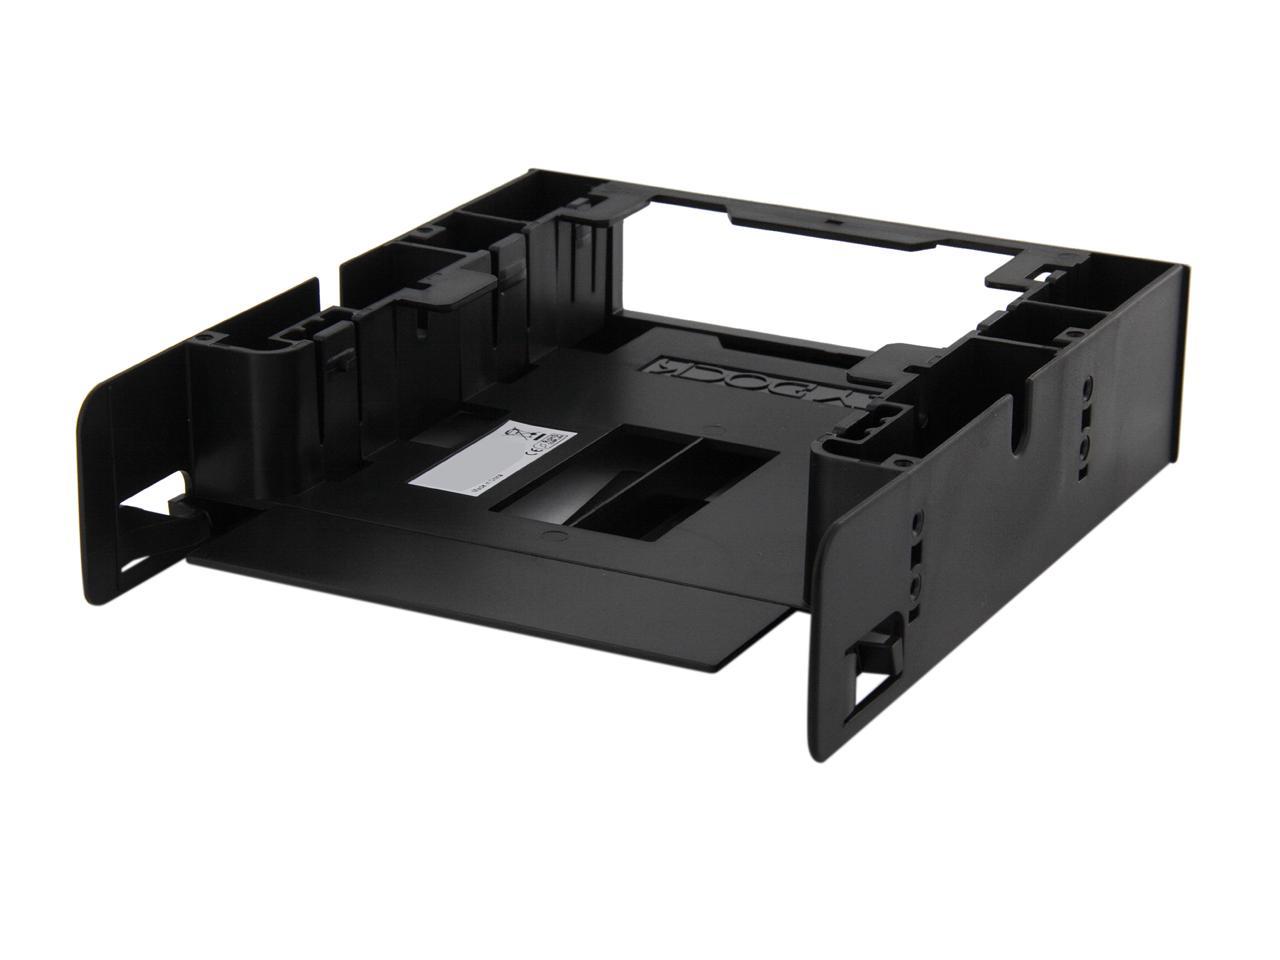 ICY DOCK Dual 2.5 SSD 1 x 3.5 HDD Device Bay to 5.25 Drive Bay Converter /  Mount / Kit / Adapter - FLEX-FIT Trio MB343SP